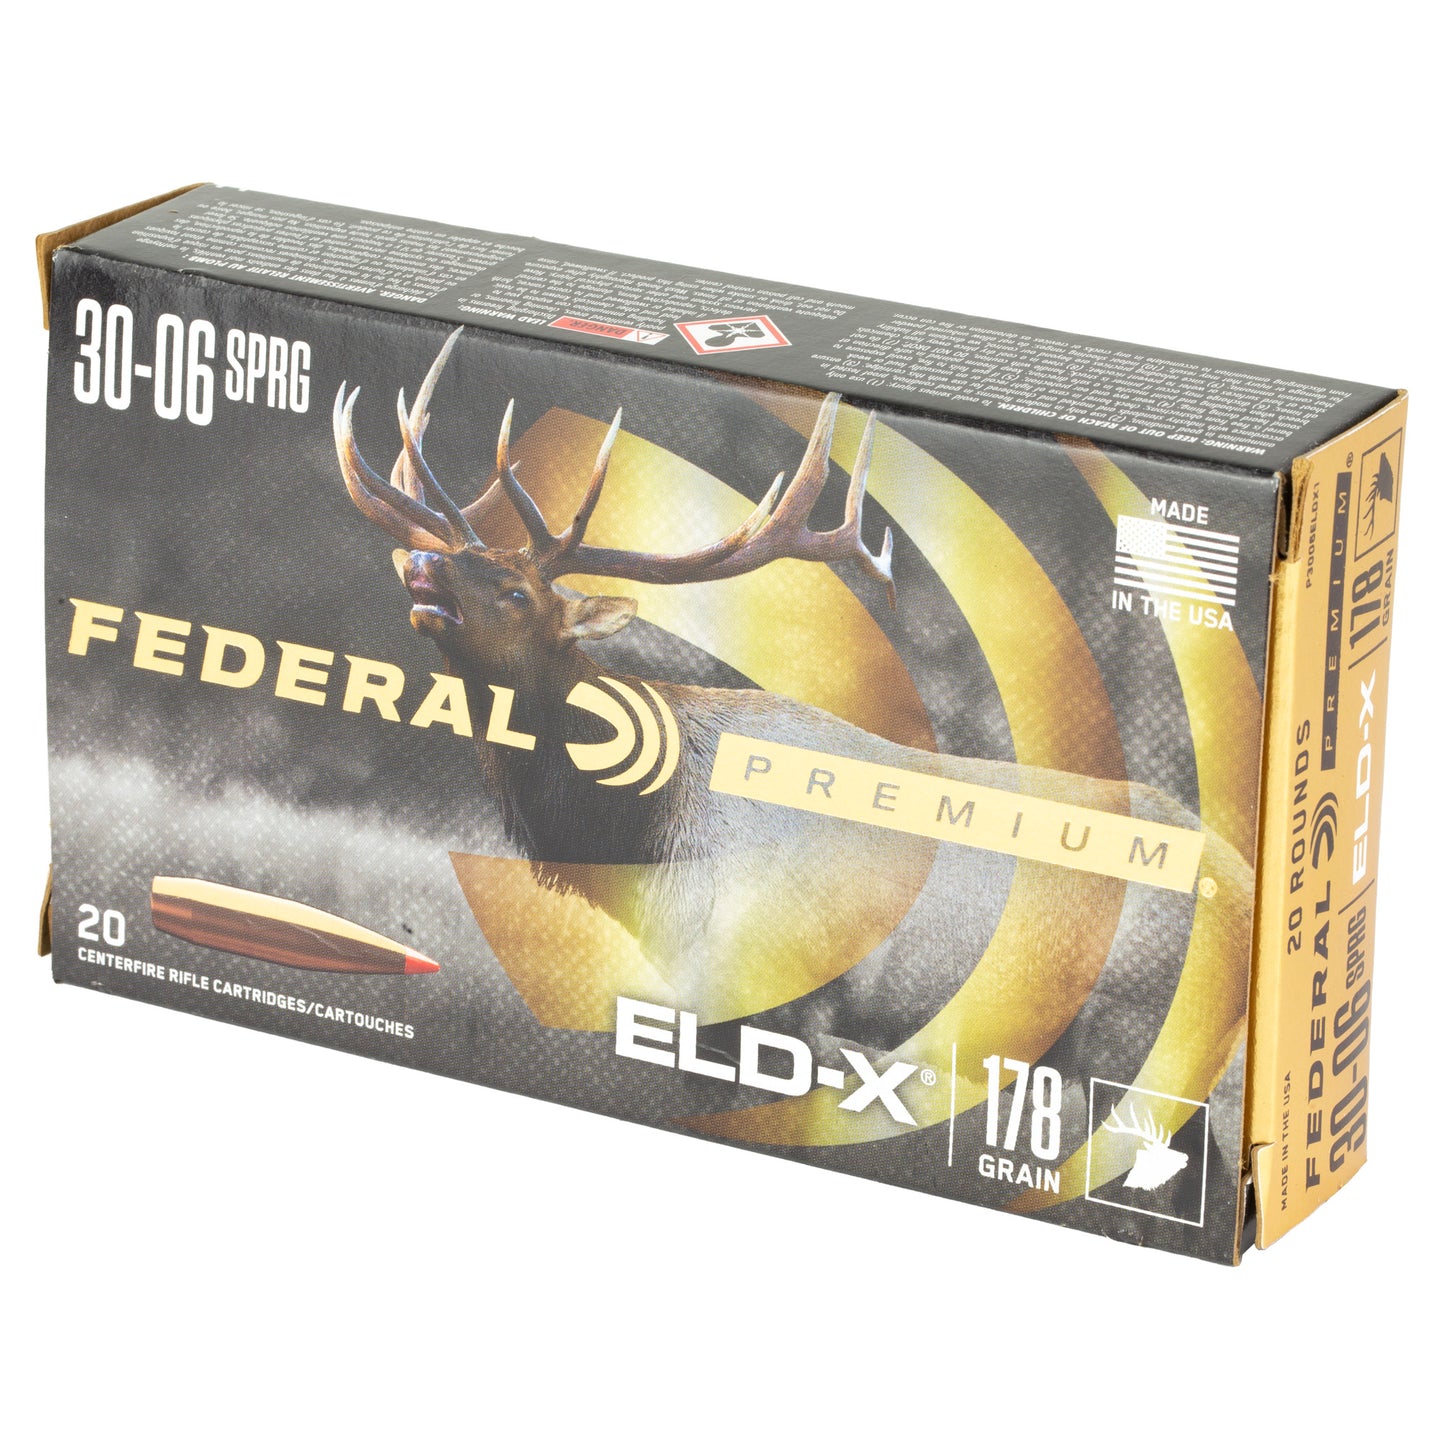 Federal, Federal Premium, Extremely Low Drag eXpanding, 30-06 Springfield, 178 Grain, Polymer Tip, 20 Rounds